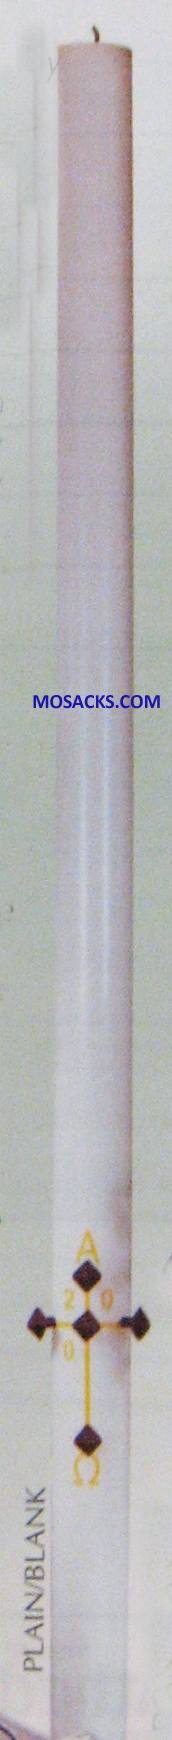 Classic Paschal Candle Plain/Blank by Cathedral Candle